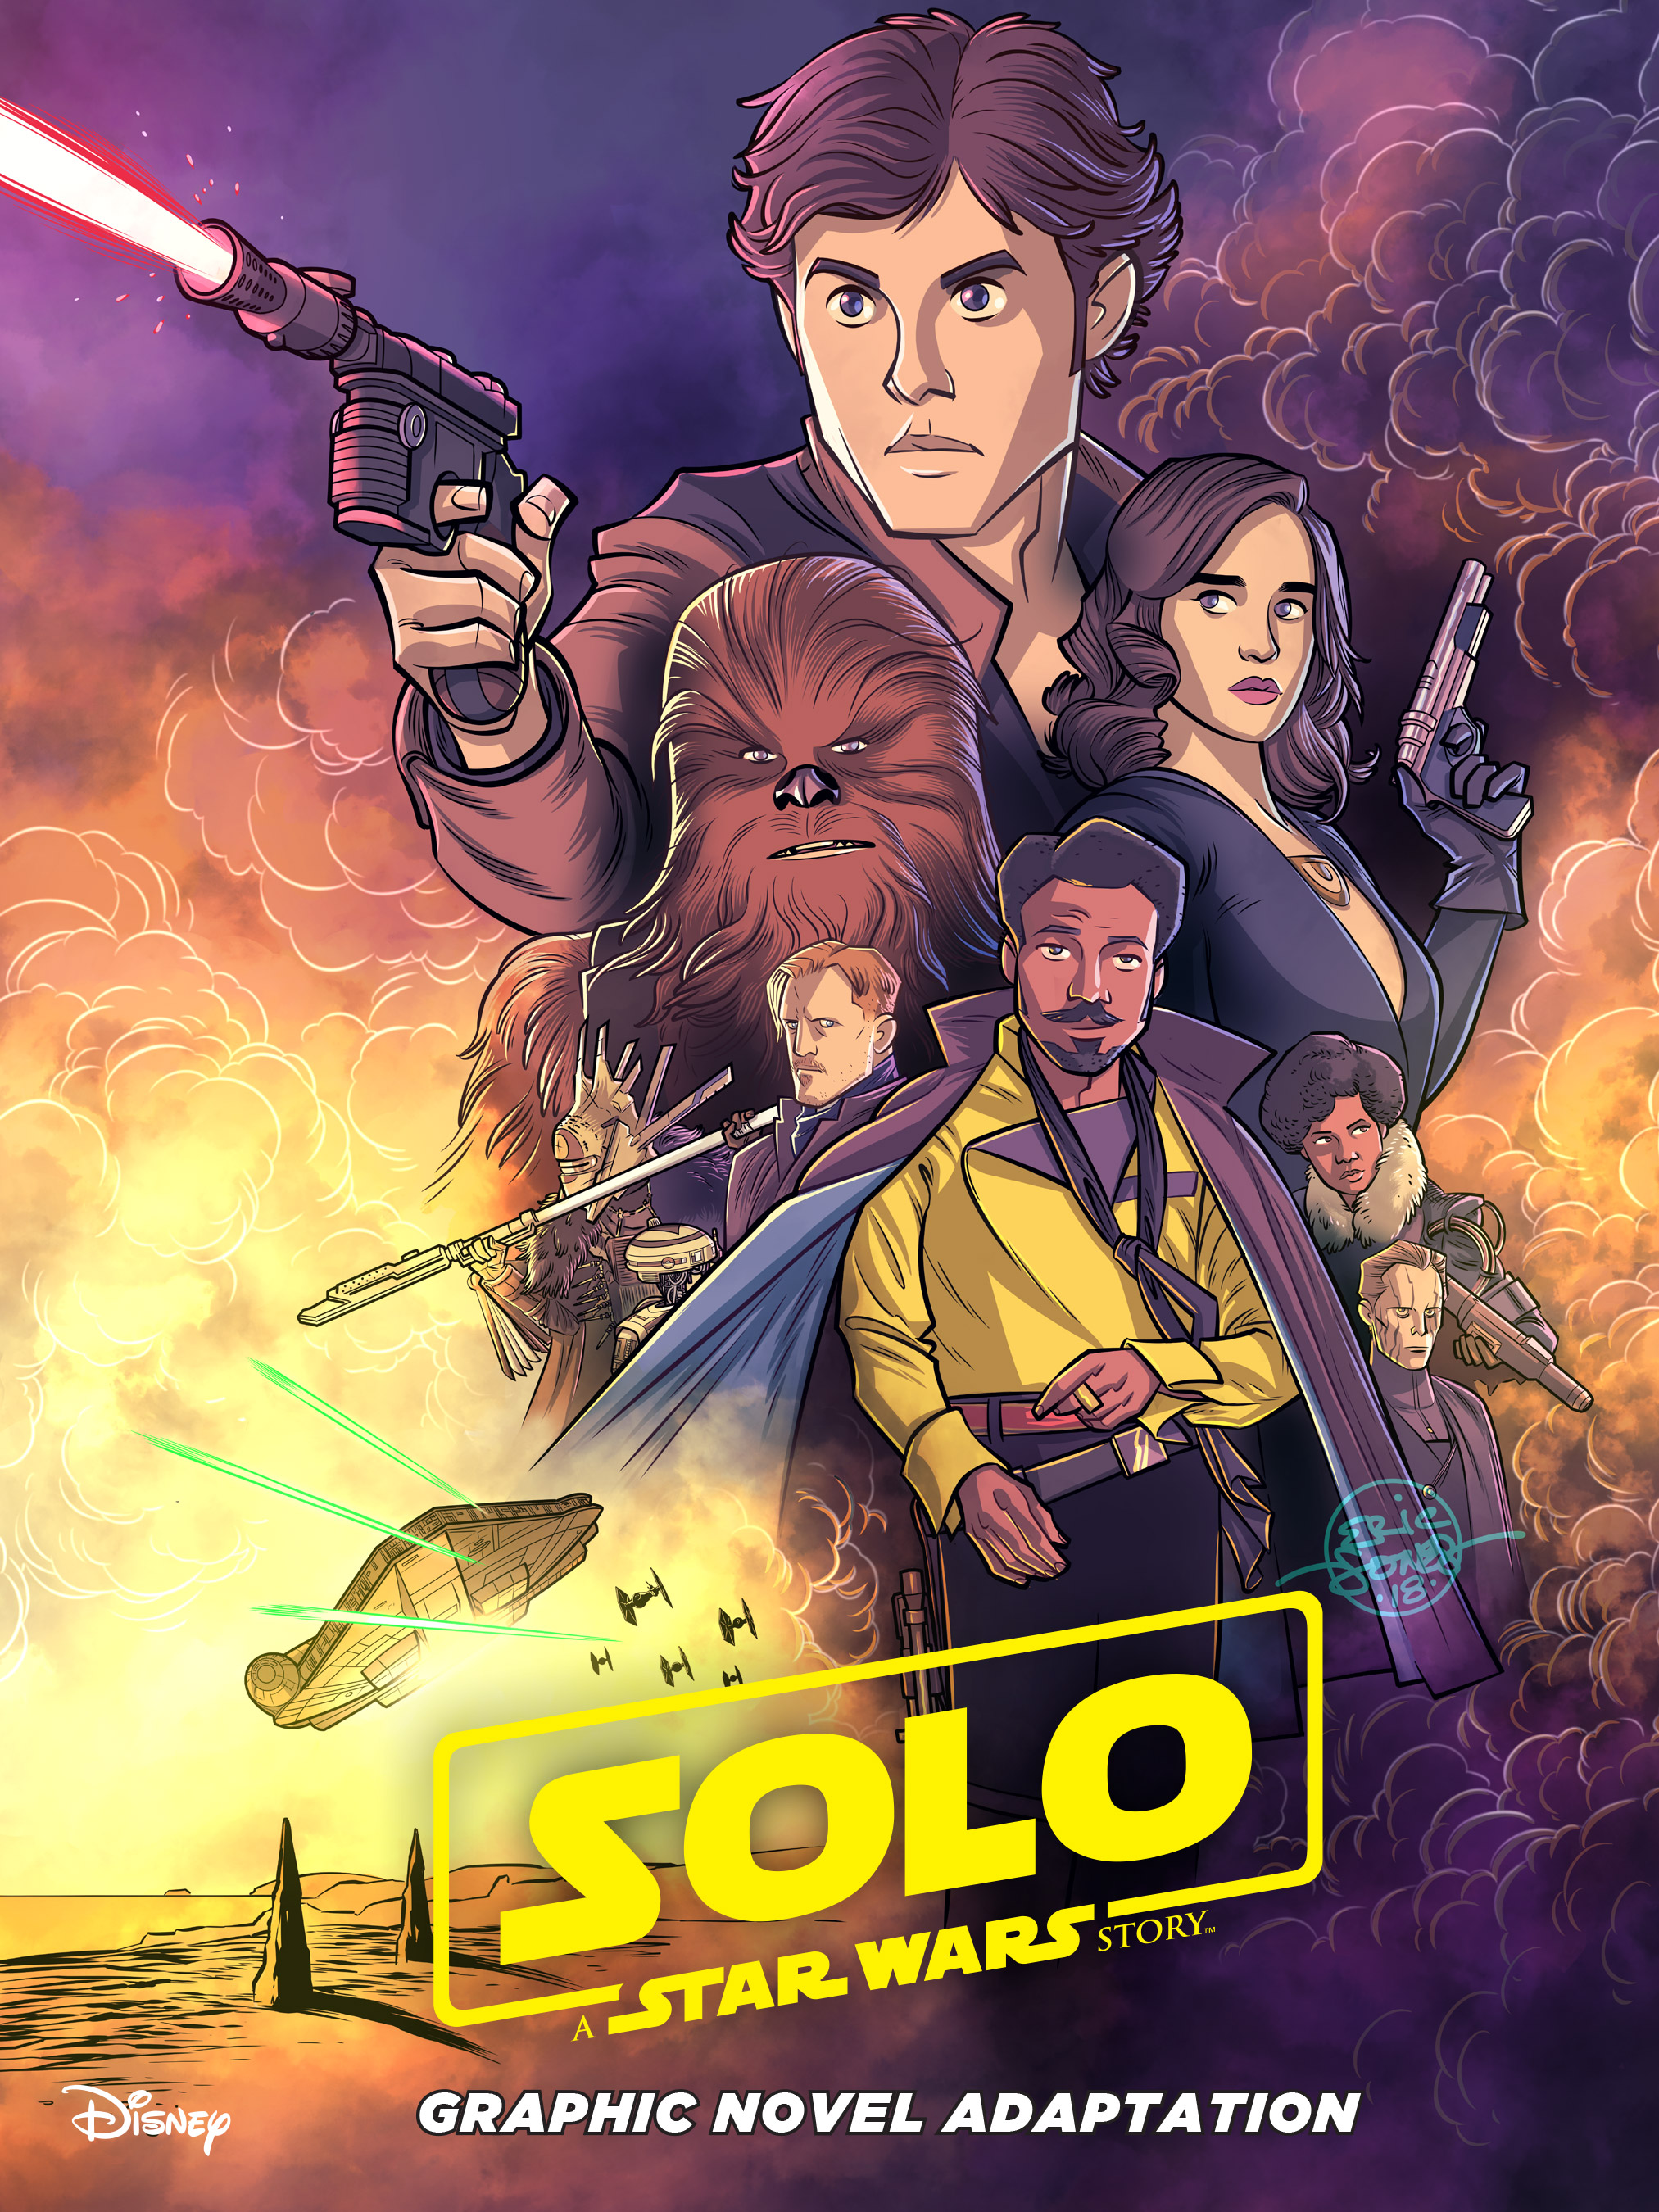 Read online Star Wars: Solo Graphic Novel Adaptation comic -  Issue # TPB - 1